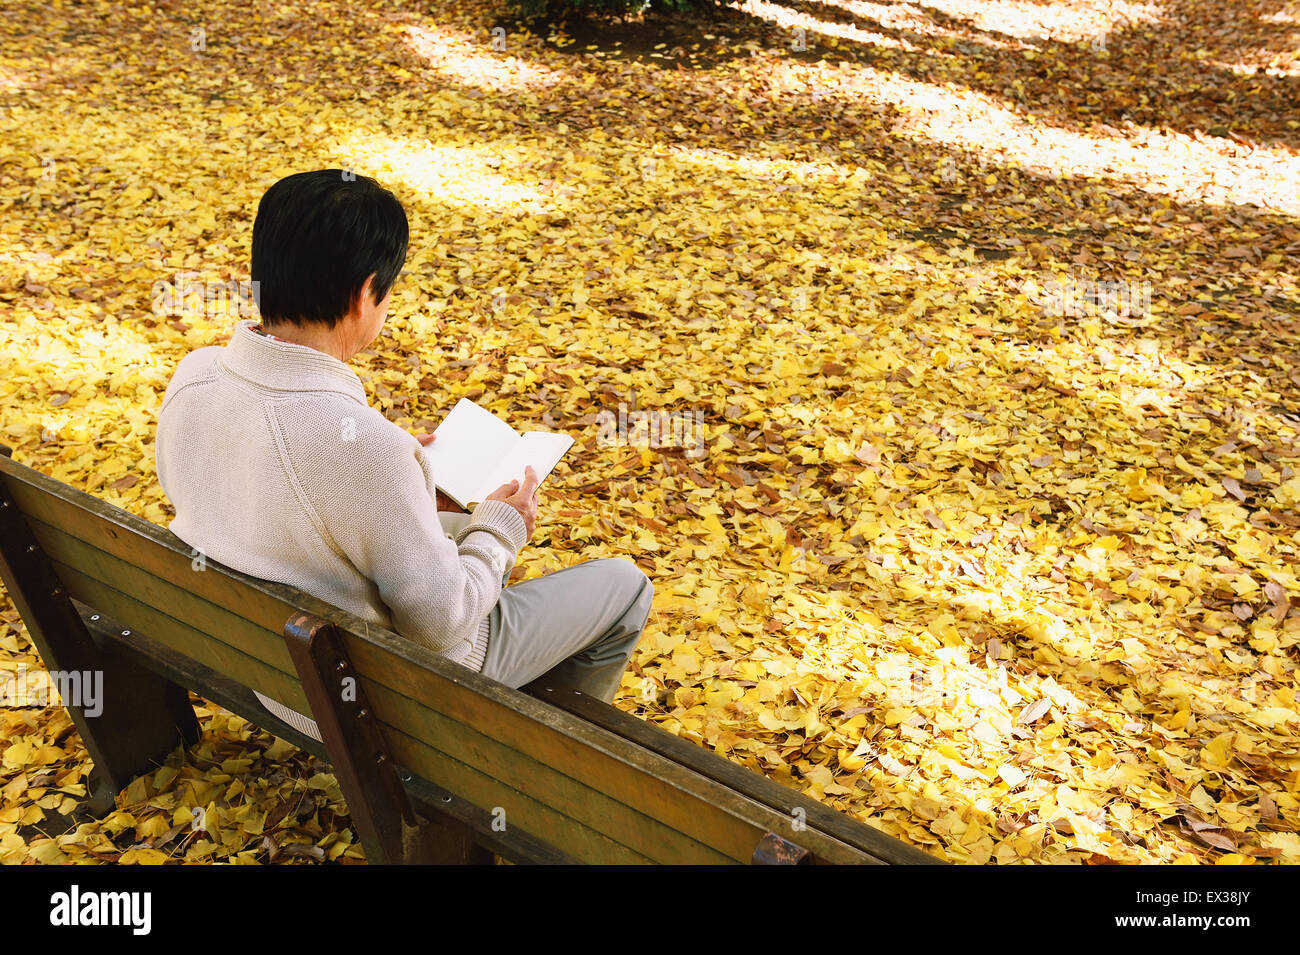 Senior Japanese man sitting on a bench with a book in a city park in Autumn Stock Photo